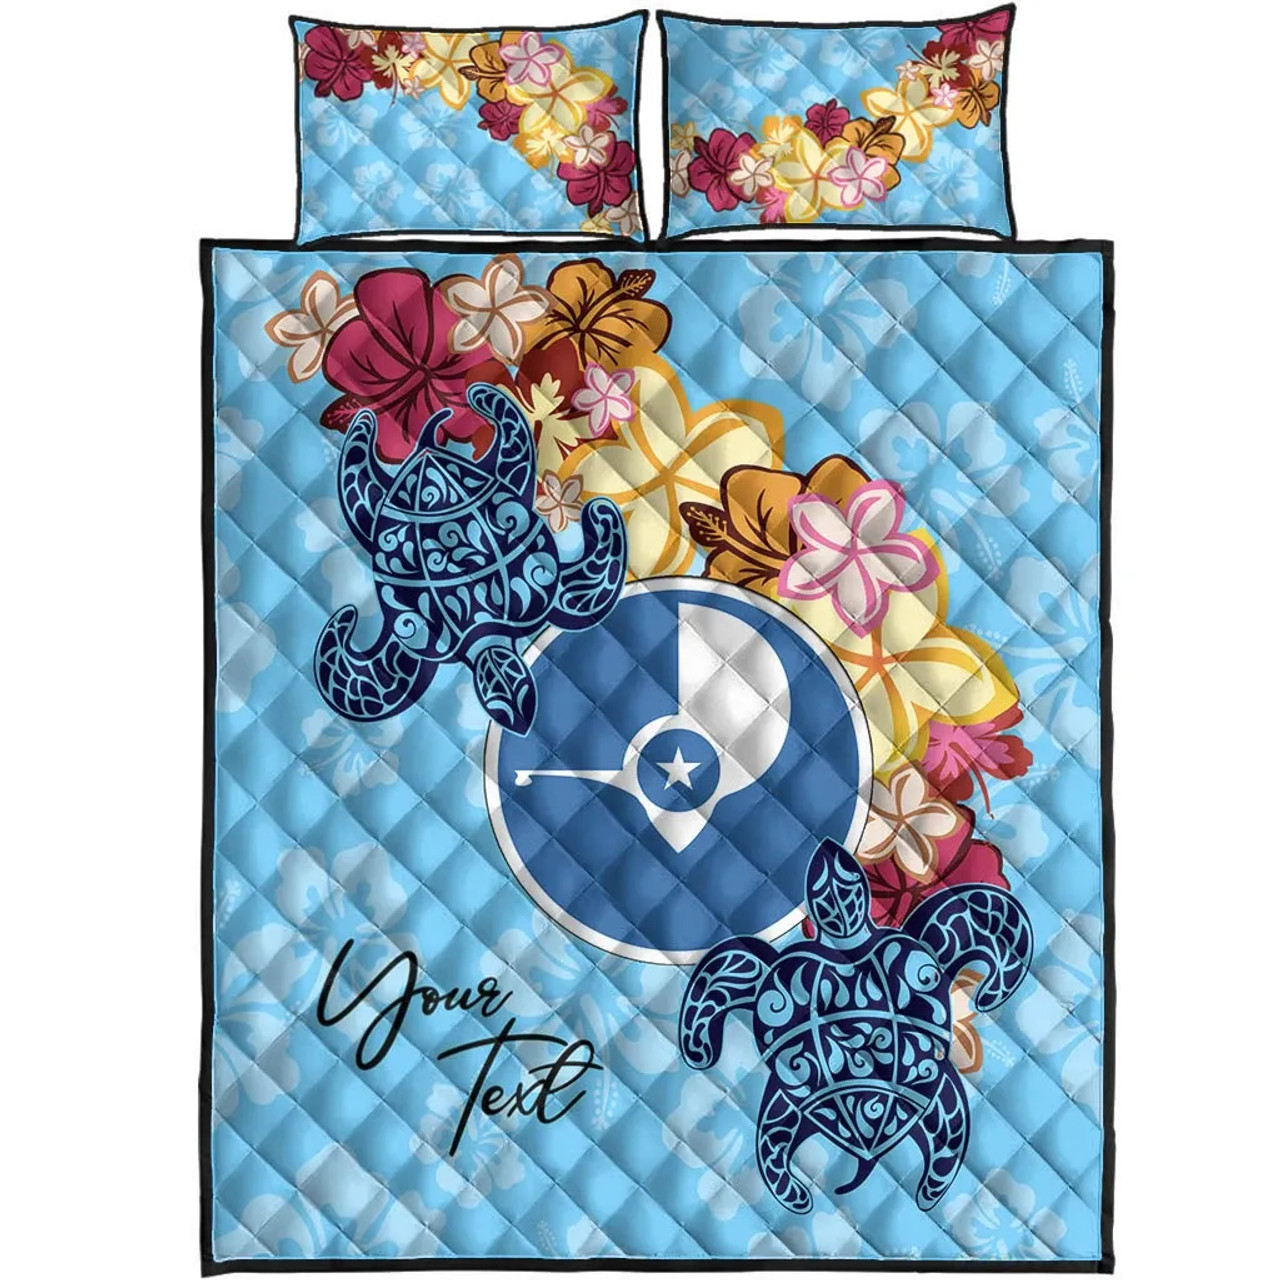 Yap Custom Personalised Quilt Bed Set - Tropical Style 5